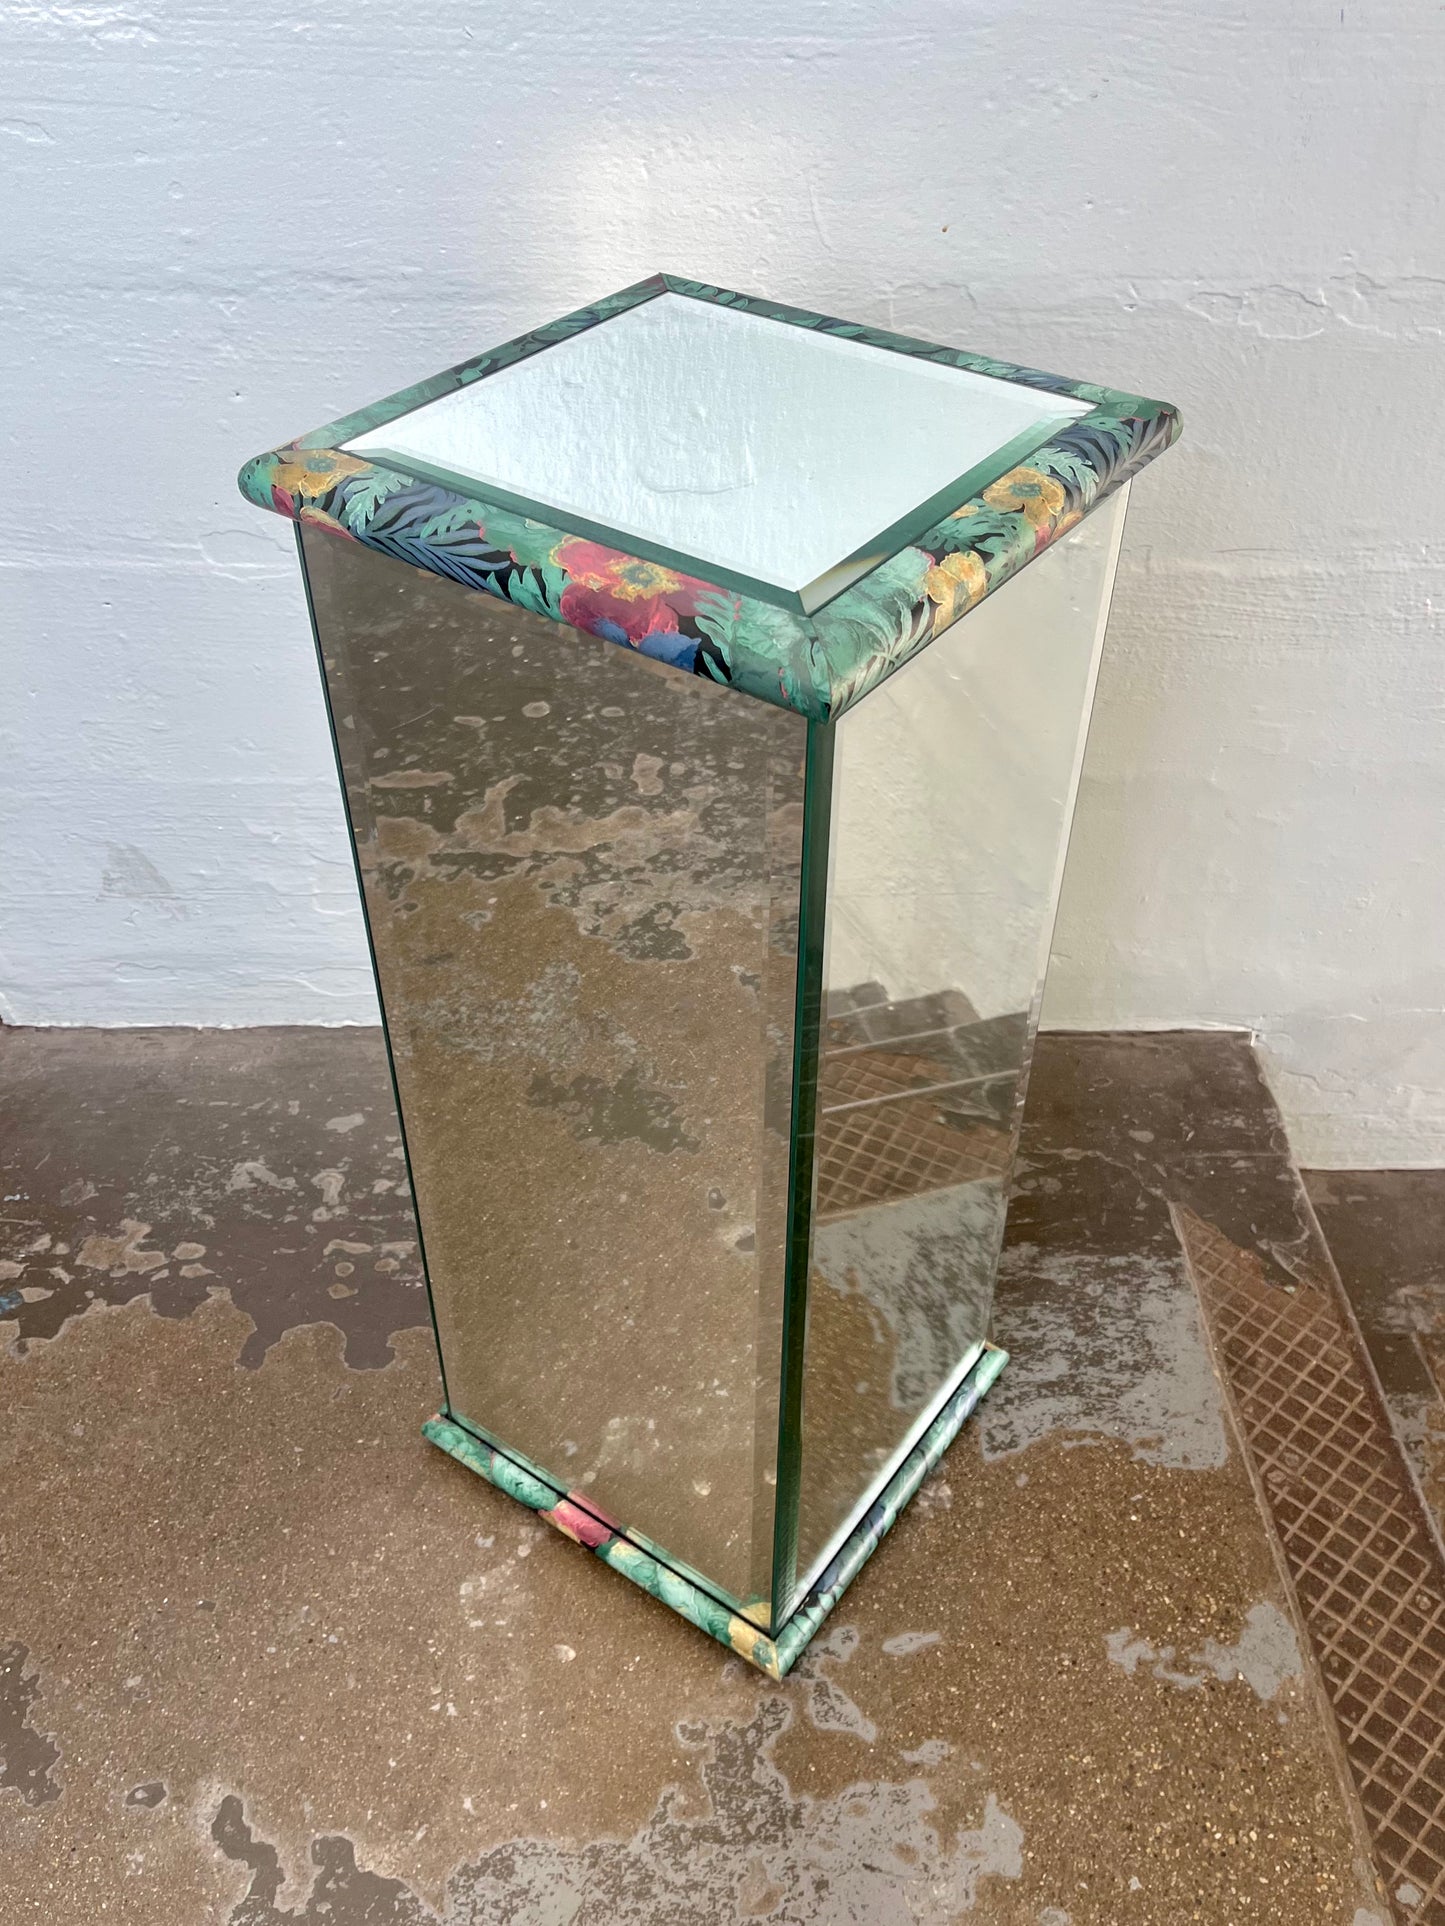 Vintage Mirrored Pedestals with Floral Accents